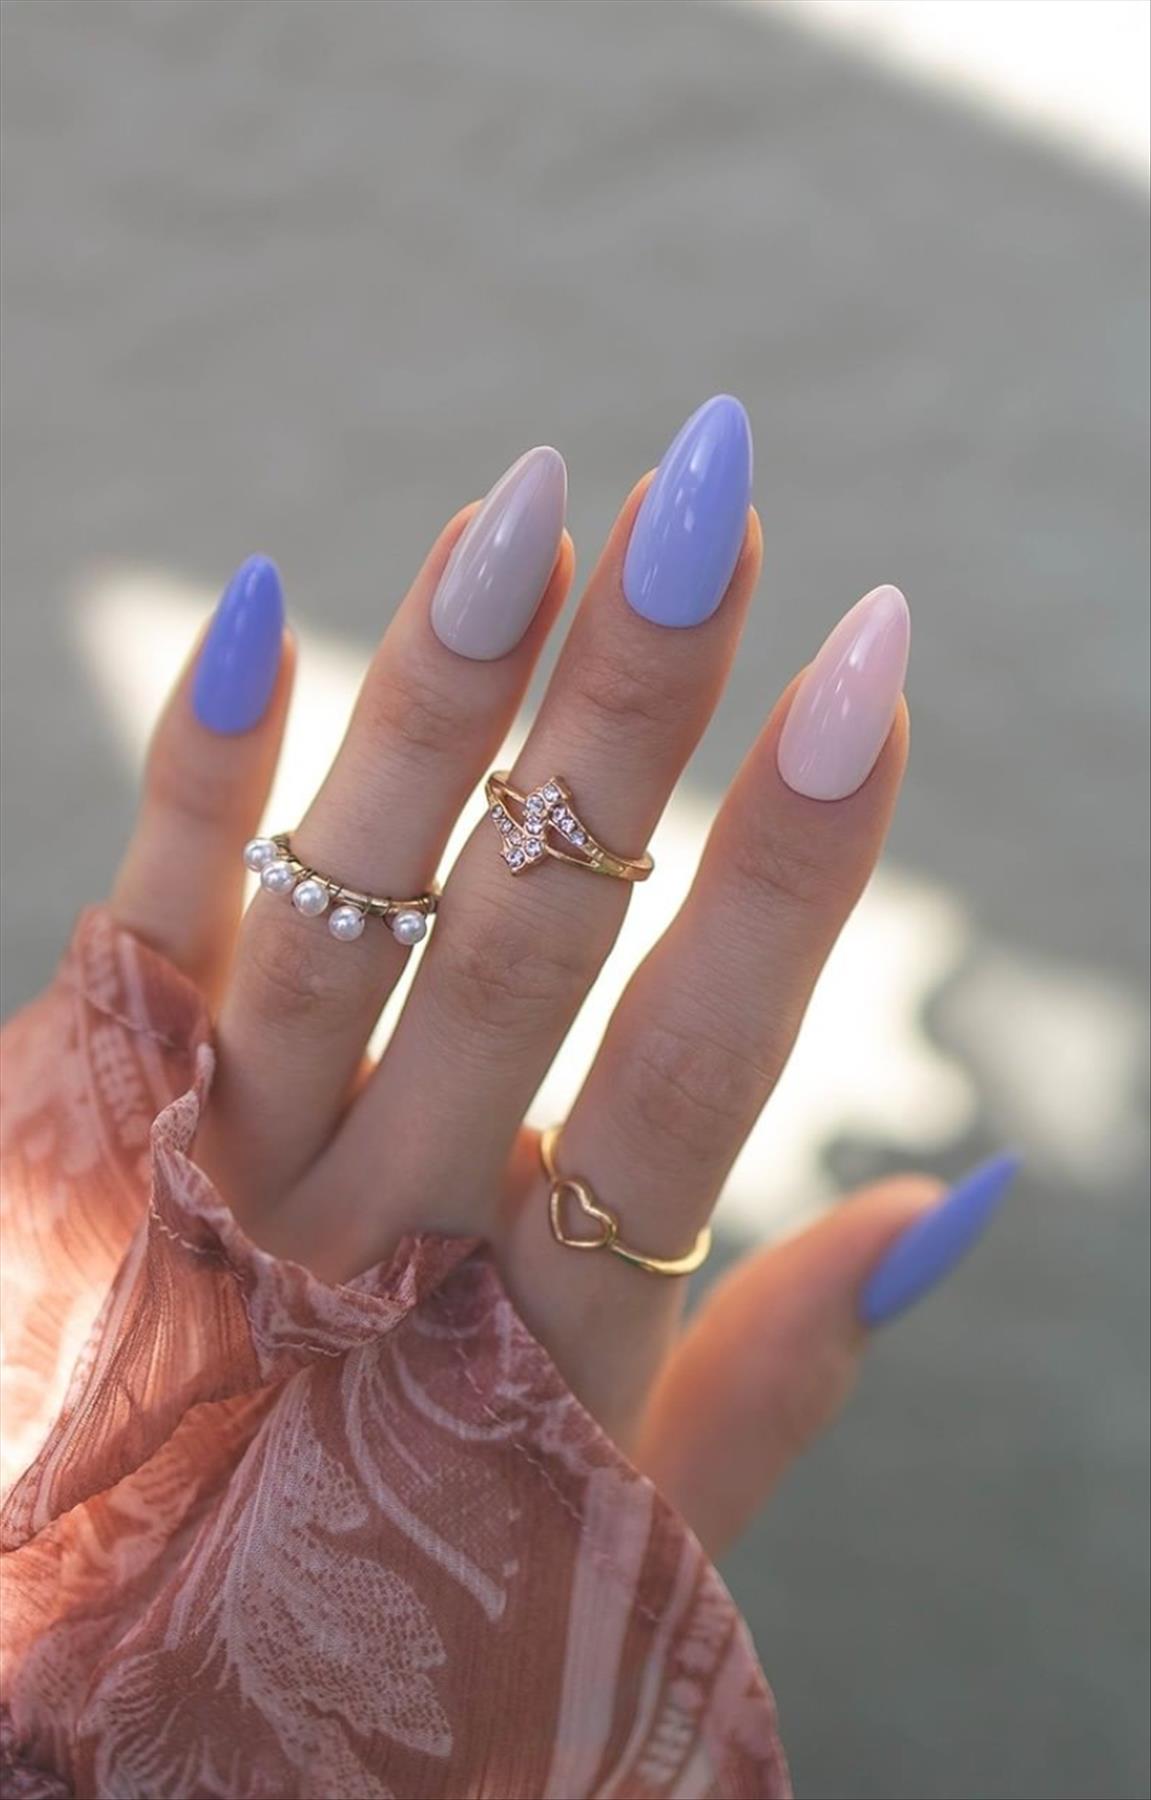 Gorgeous summer nail color 2022 trends to get inspired